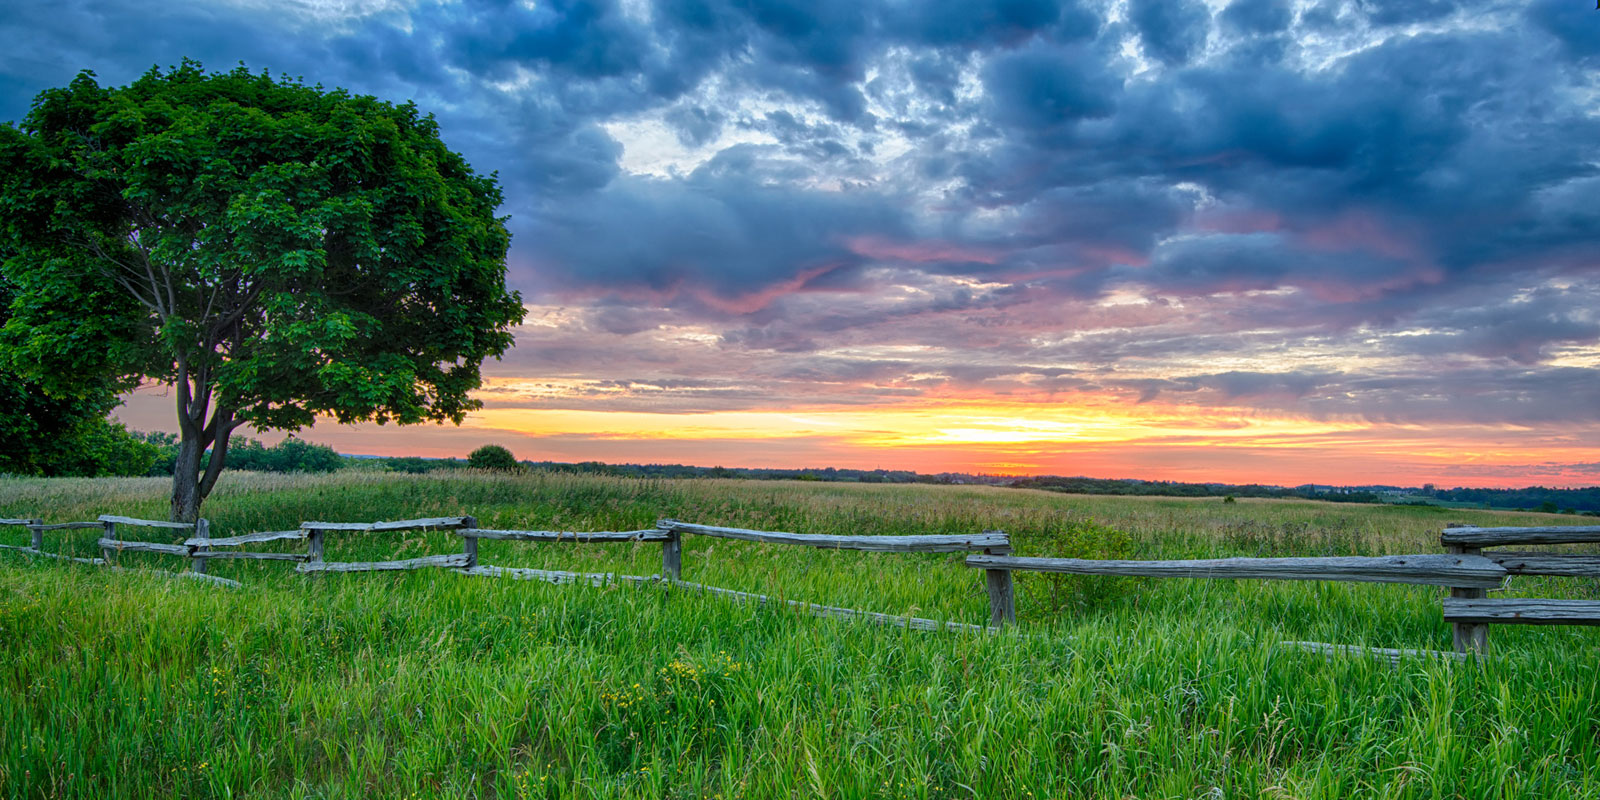 sunrise tree and fence rural ontario landscape photography